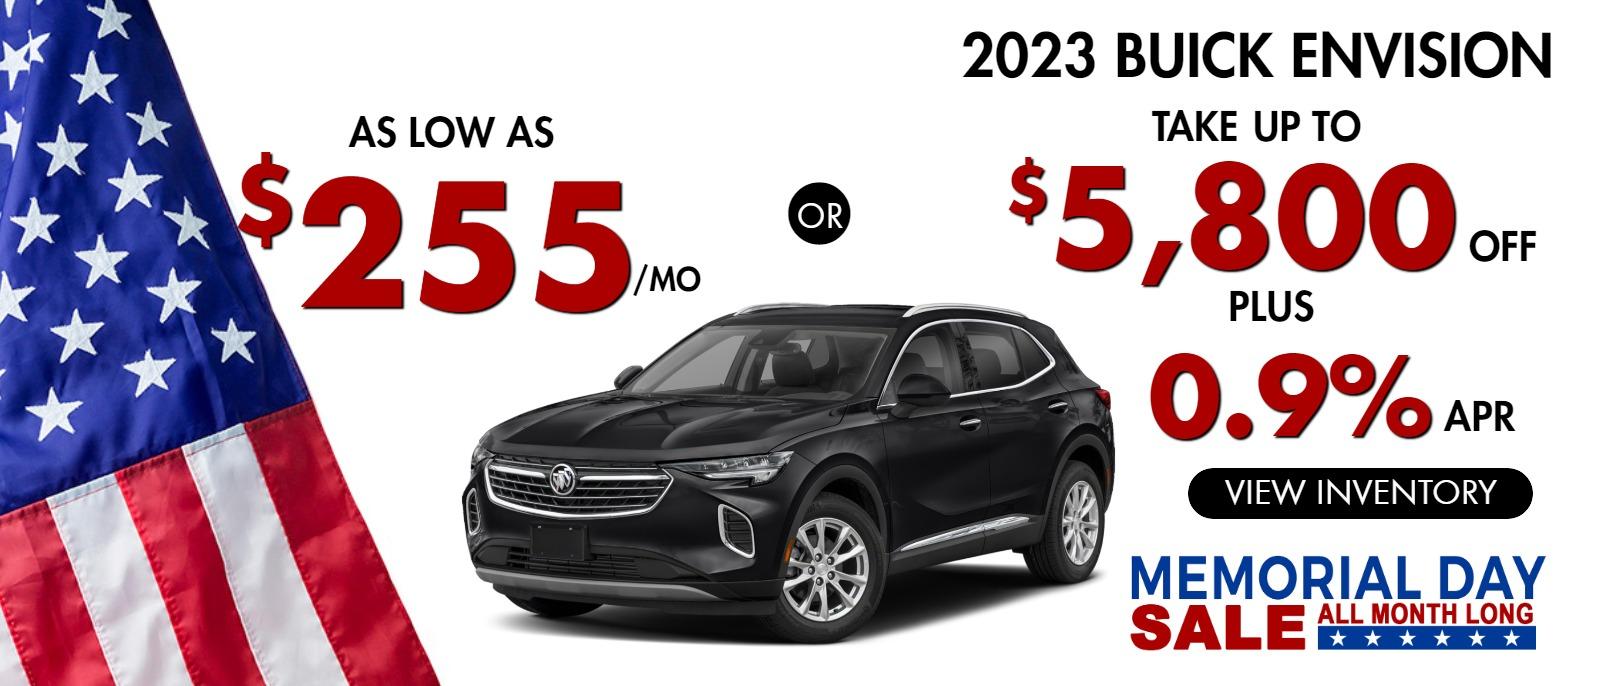 2023 Envision
Stock B8430

take up to $5800 OFF 
PLUS
0.9% finance

OR AS LOW AS $255/mo